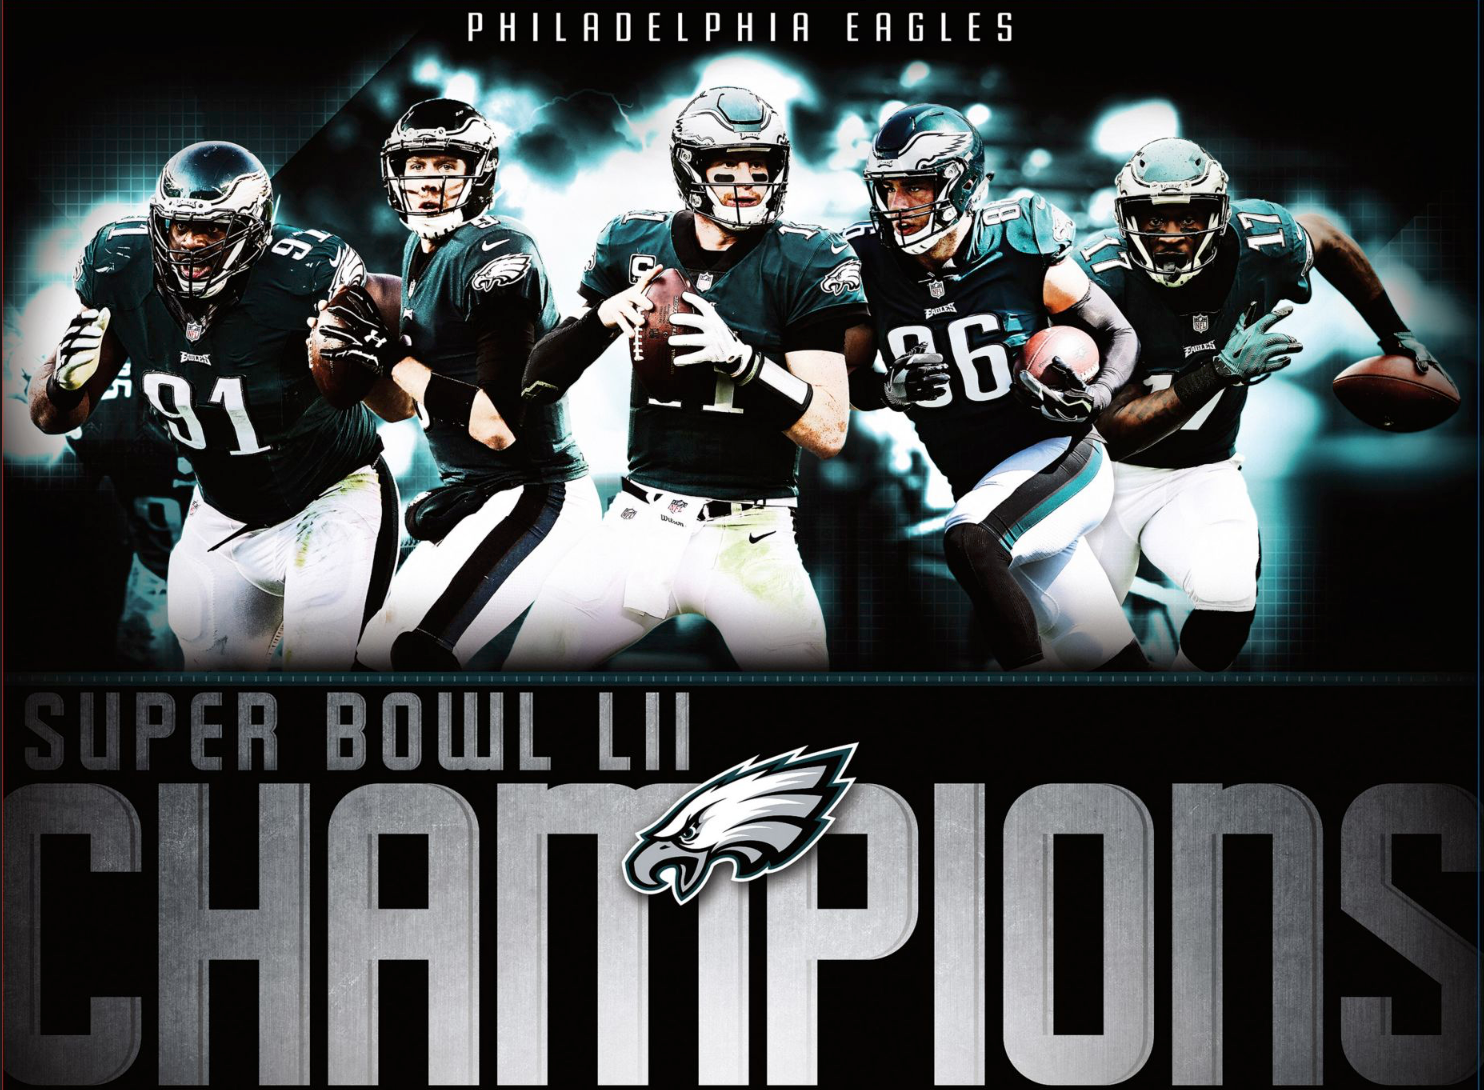 Huge Excitement and Expectations for The Philadelphia Eagles!